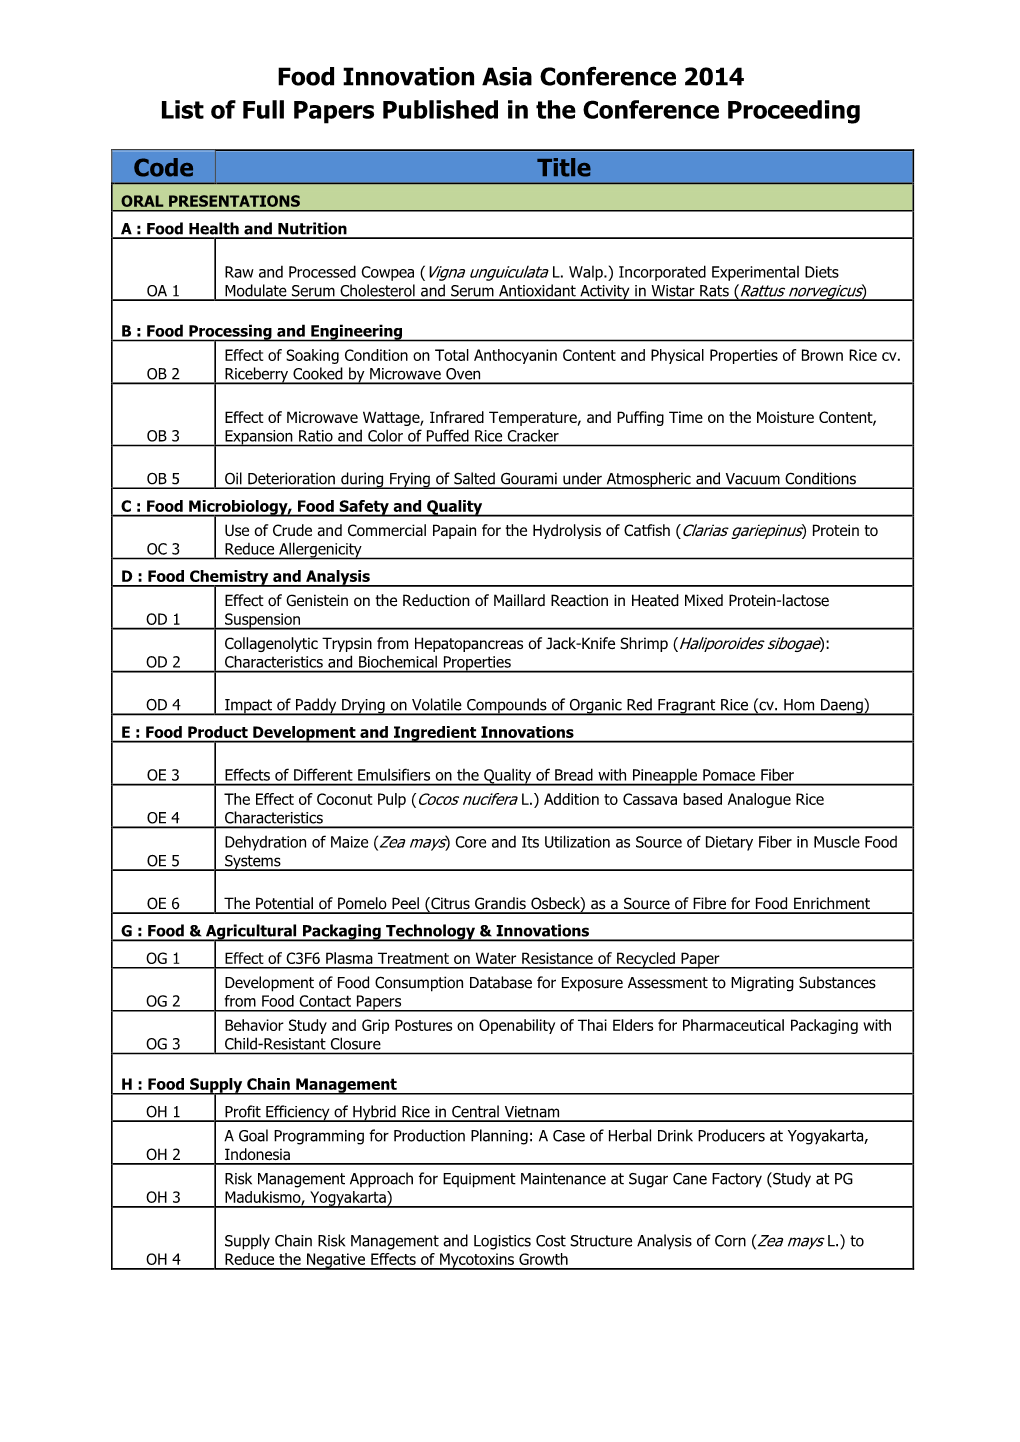 Food Innovation Asia Conference 2014 List of Full Papers Published in the Conference Proceeding